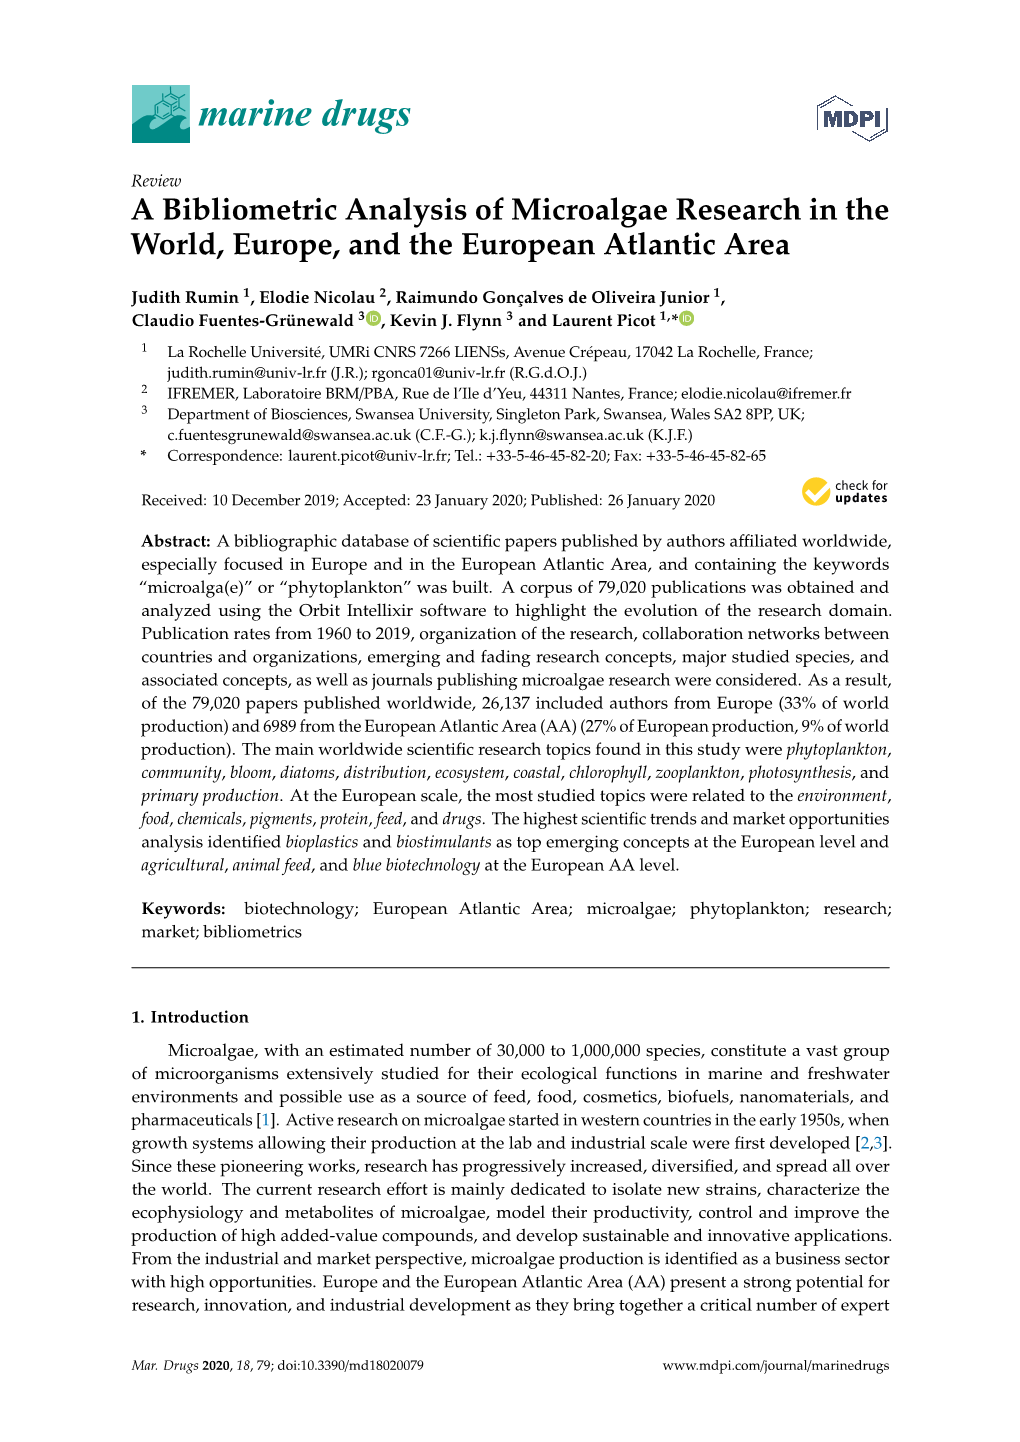 A Bibliometric Analysis of Microalgae Research in the World, Europe, and the European Atlantic Area